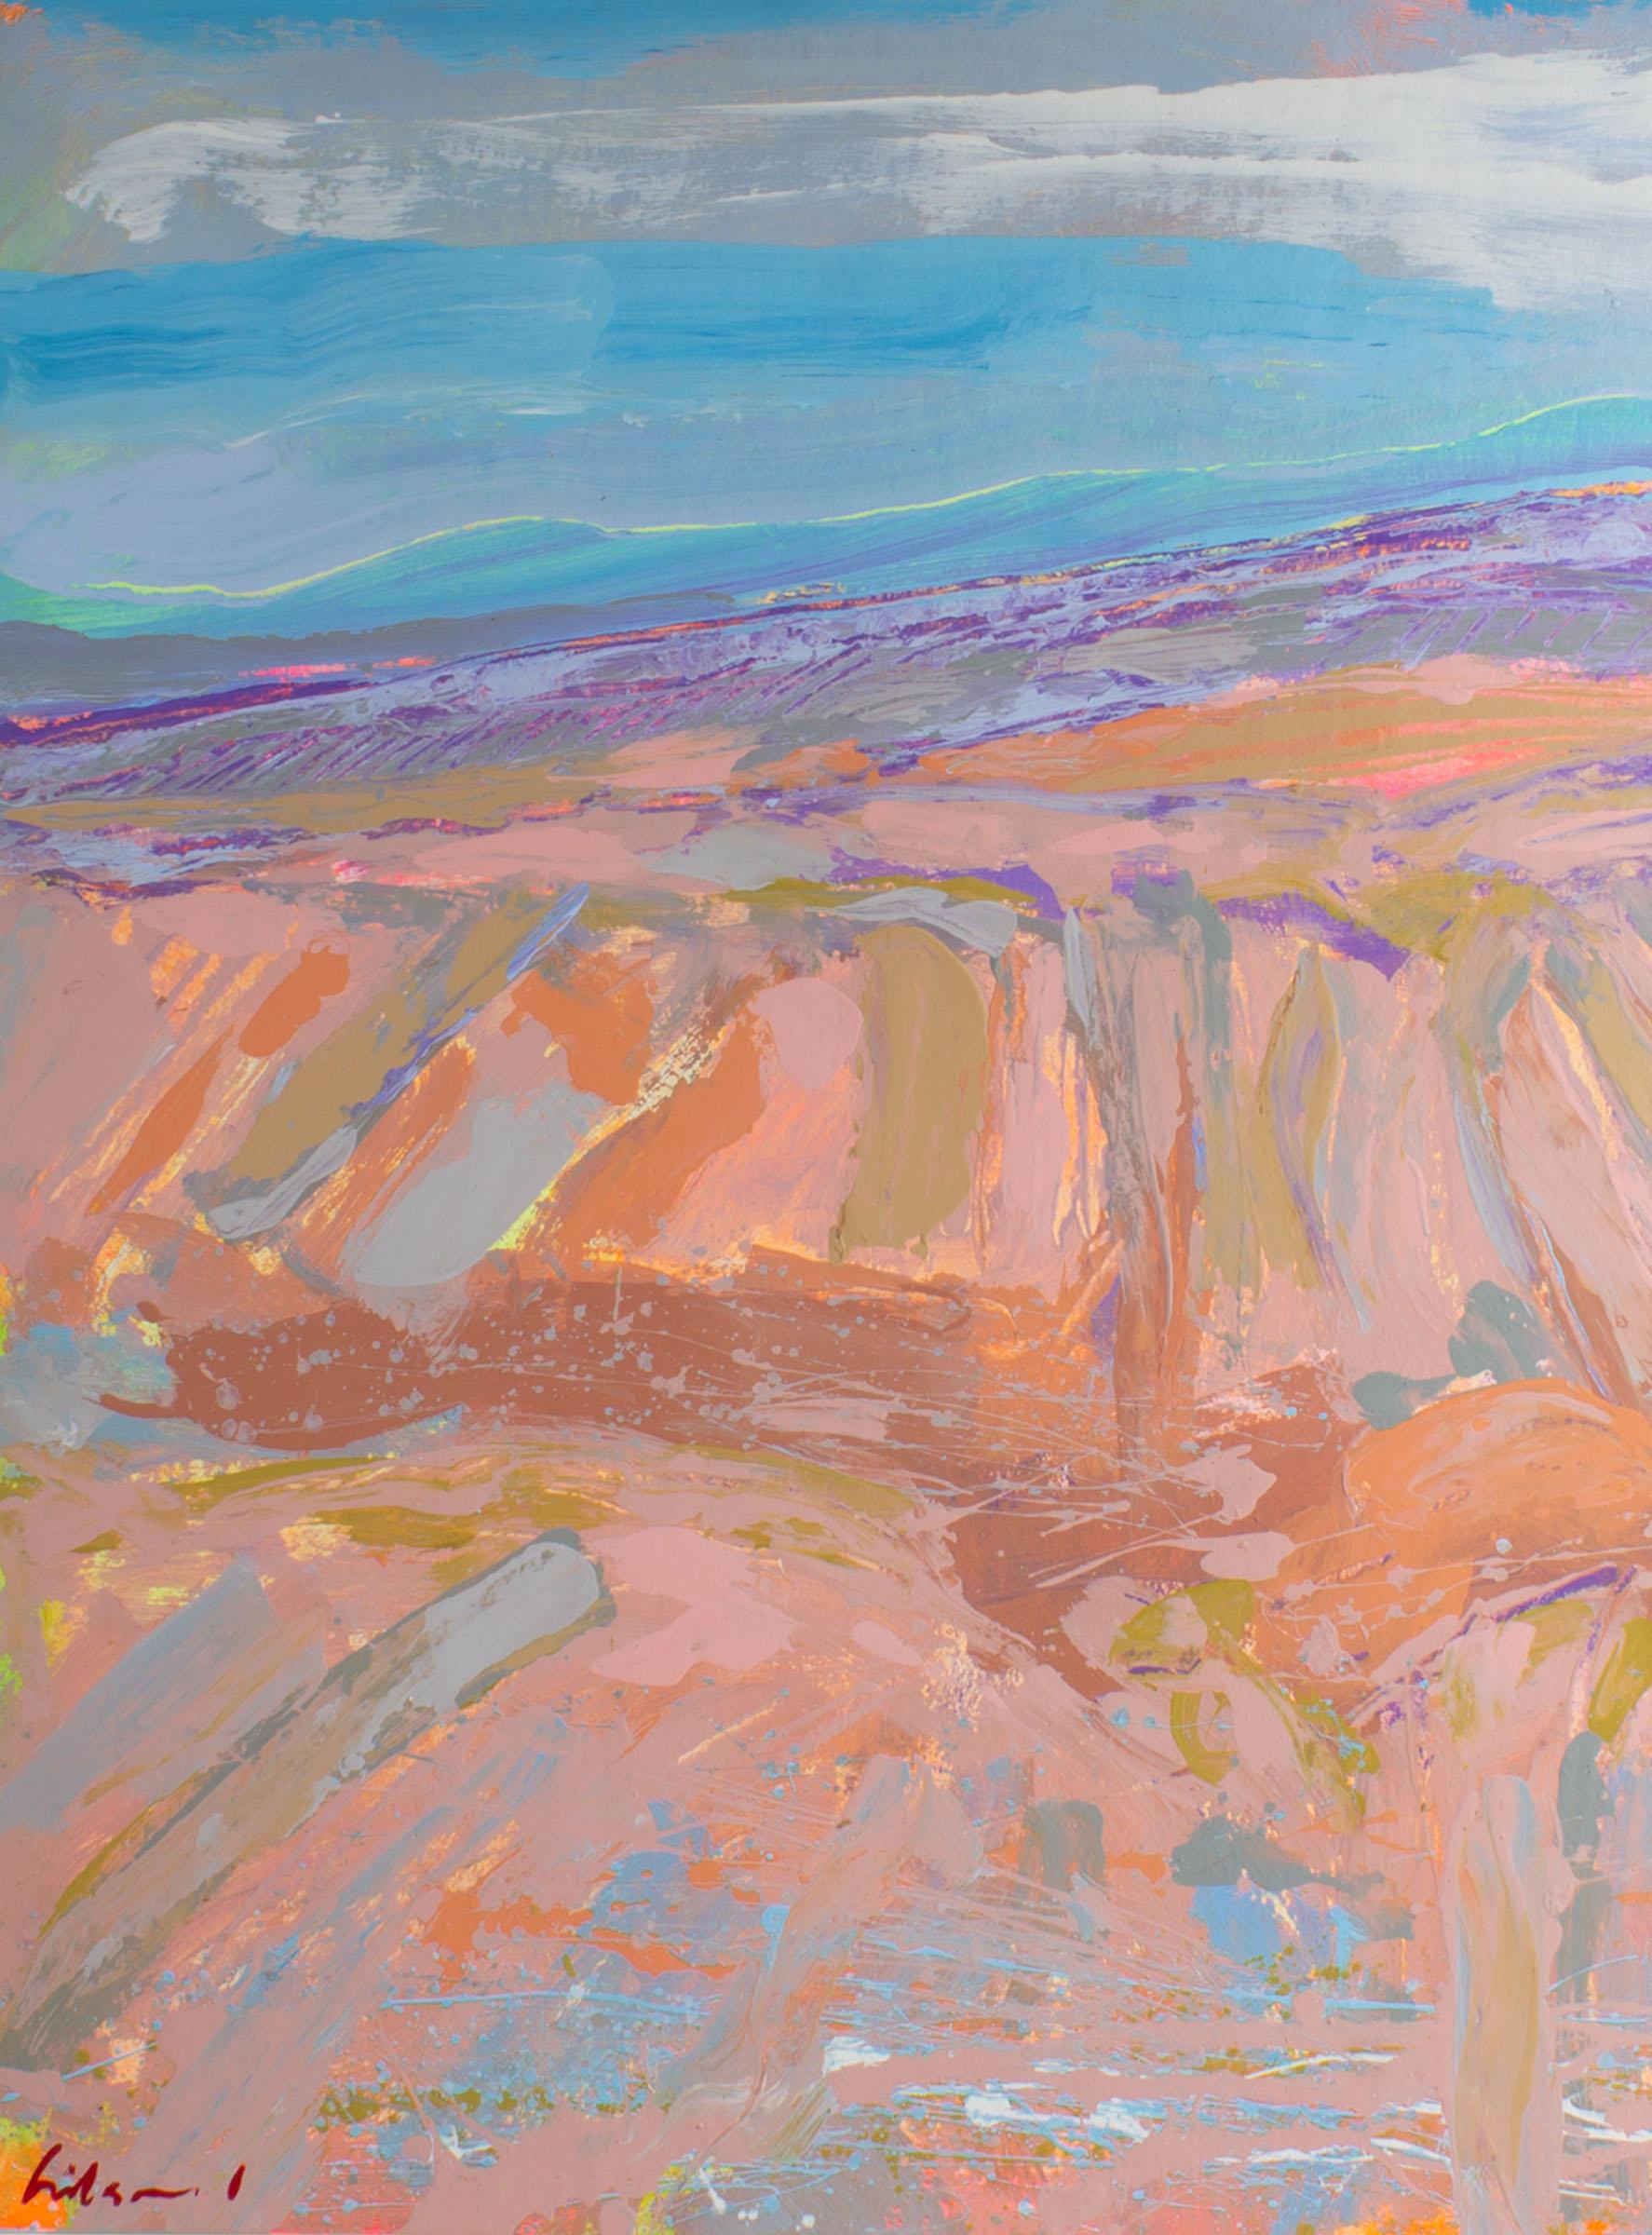 An abstract acrylic on paper landscape painting by American artist Harry Hilson (1935-2004). Gestural lines come together to create a vibrant abstract landscape with a horizon line in the background and rolling pink fields in the foreground.